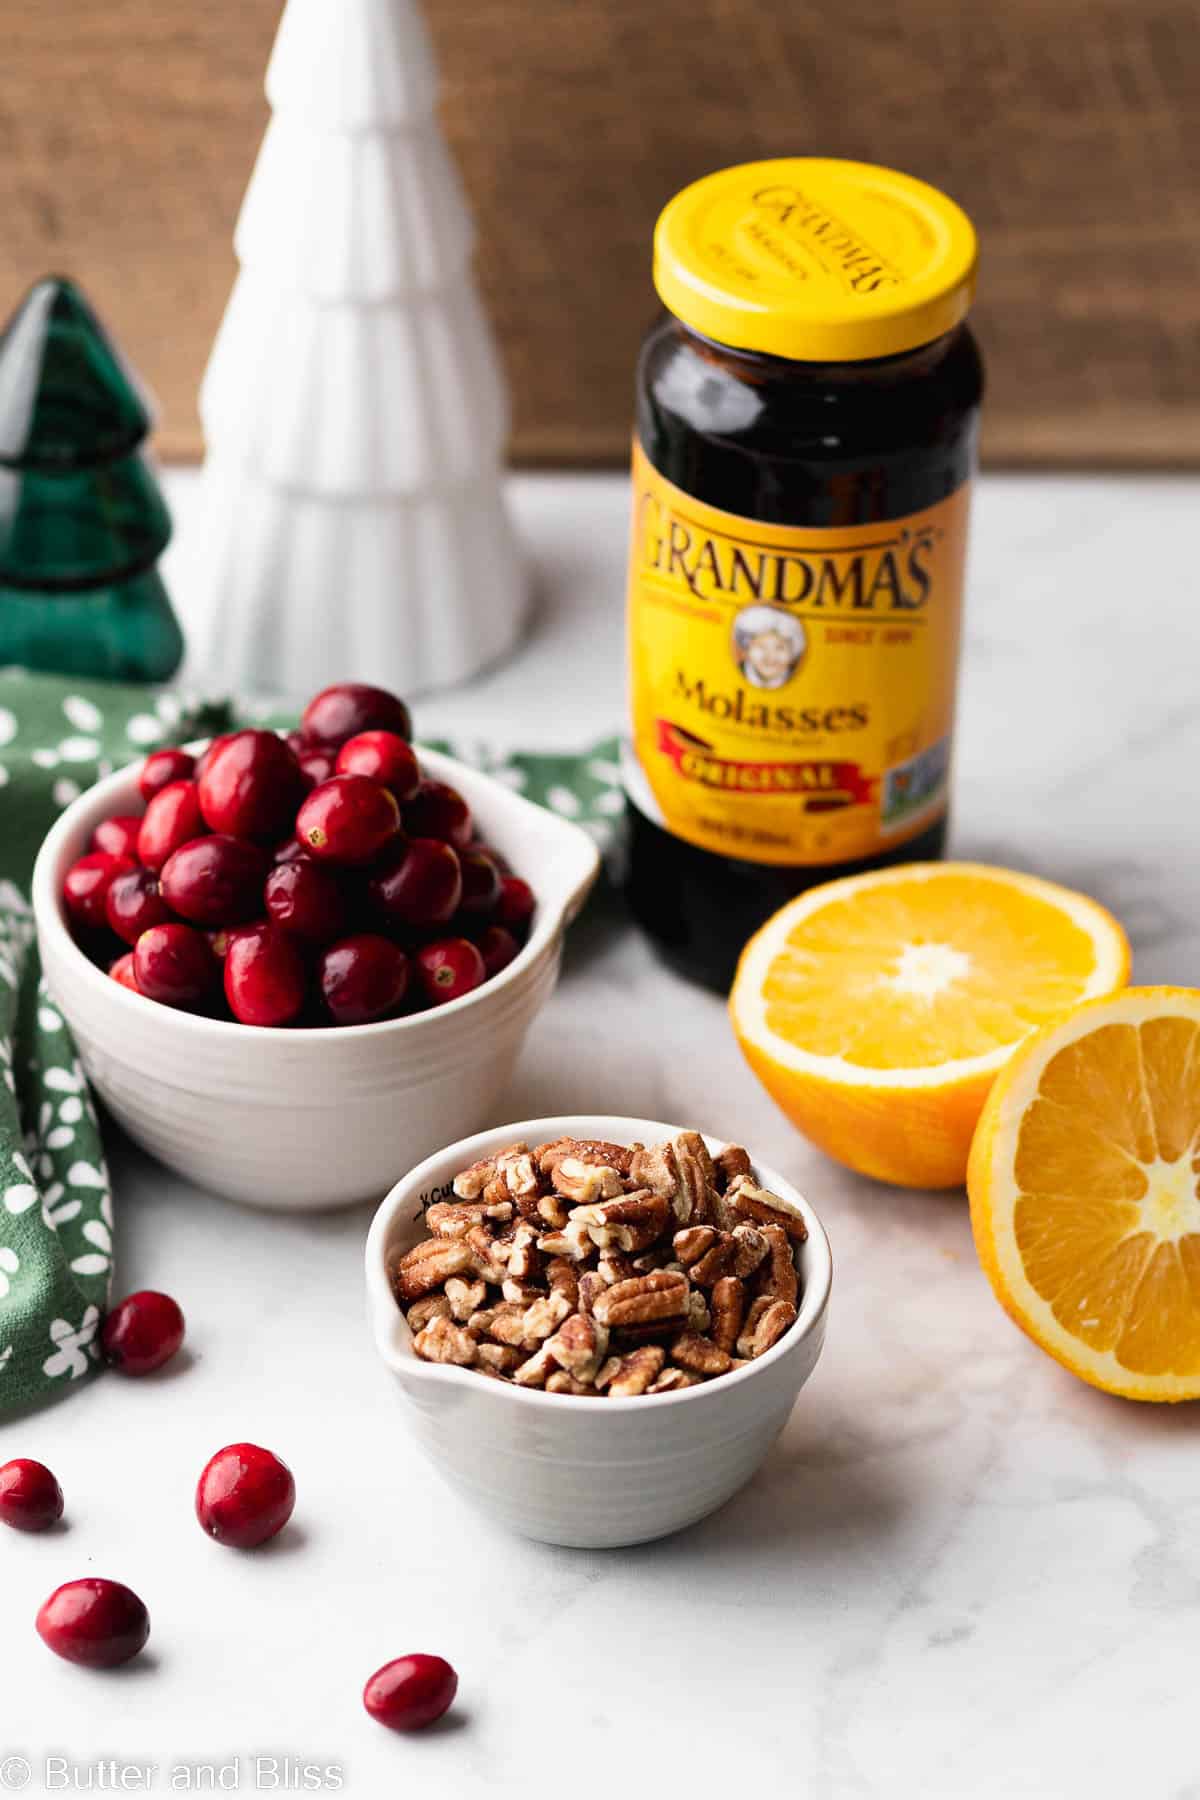 Key ingredients for cranberry Christmas bars in decorative bowls arranged on a table.